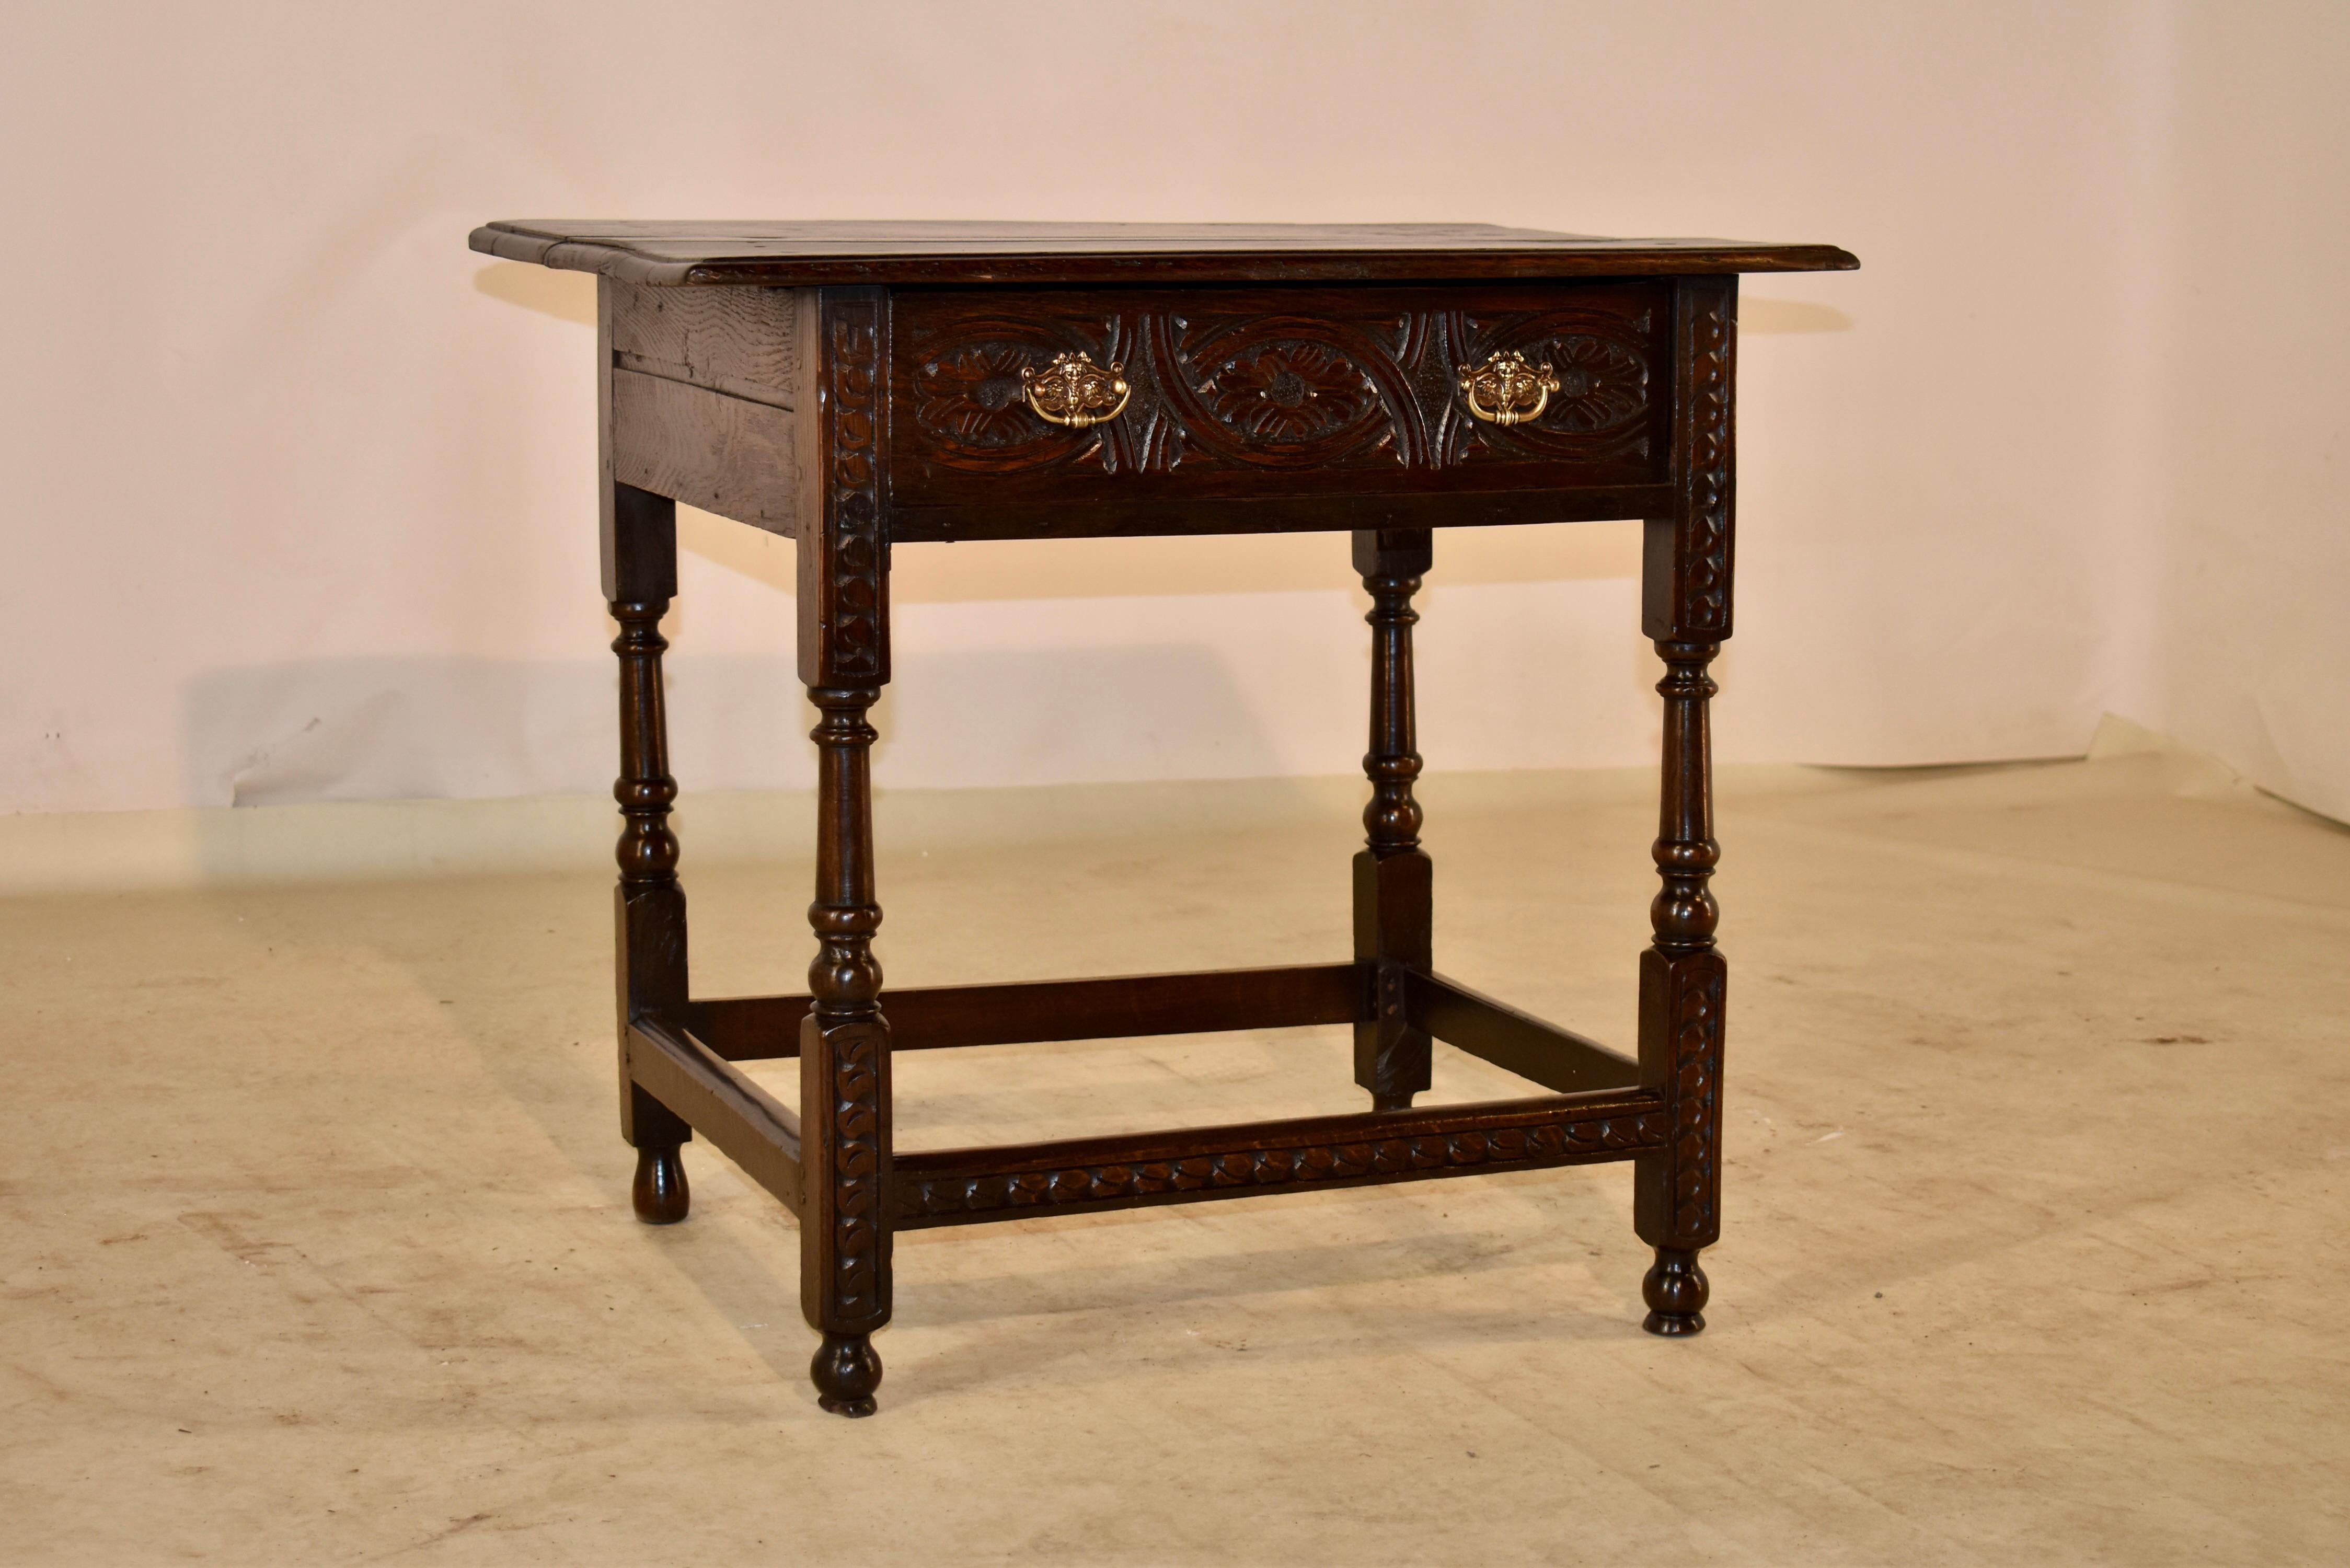 17th Century oak side table from England. The top is made from nicely grained planks and have a beveled edge, following down to simple sides and a single drawer in the front with a hand carved drawer front. The table is supported on hand turned and